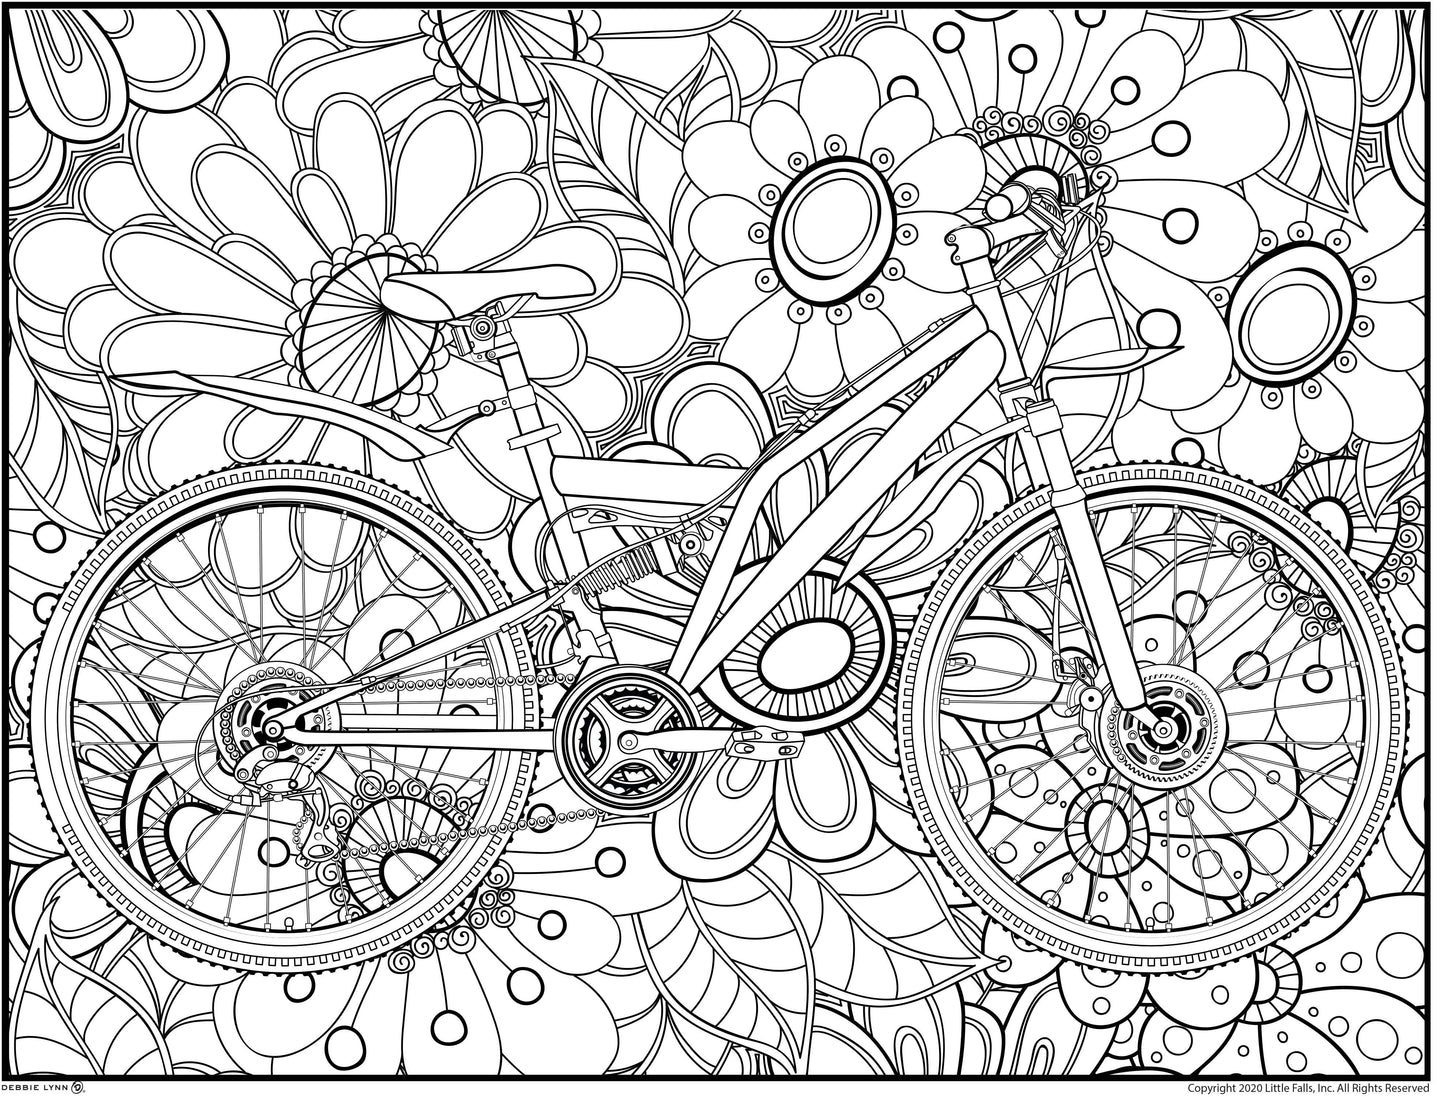 Bicycle Personalized Giant Coloring Poster 46"x60"